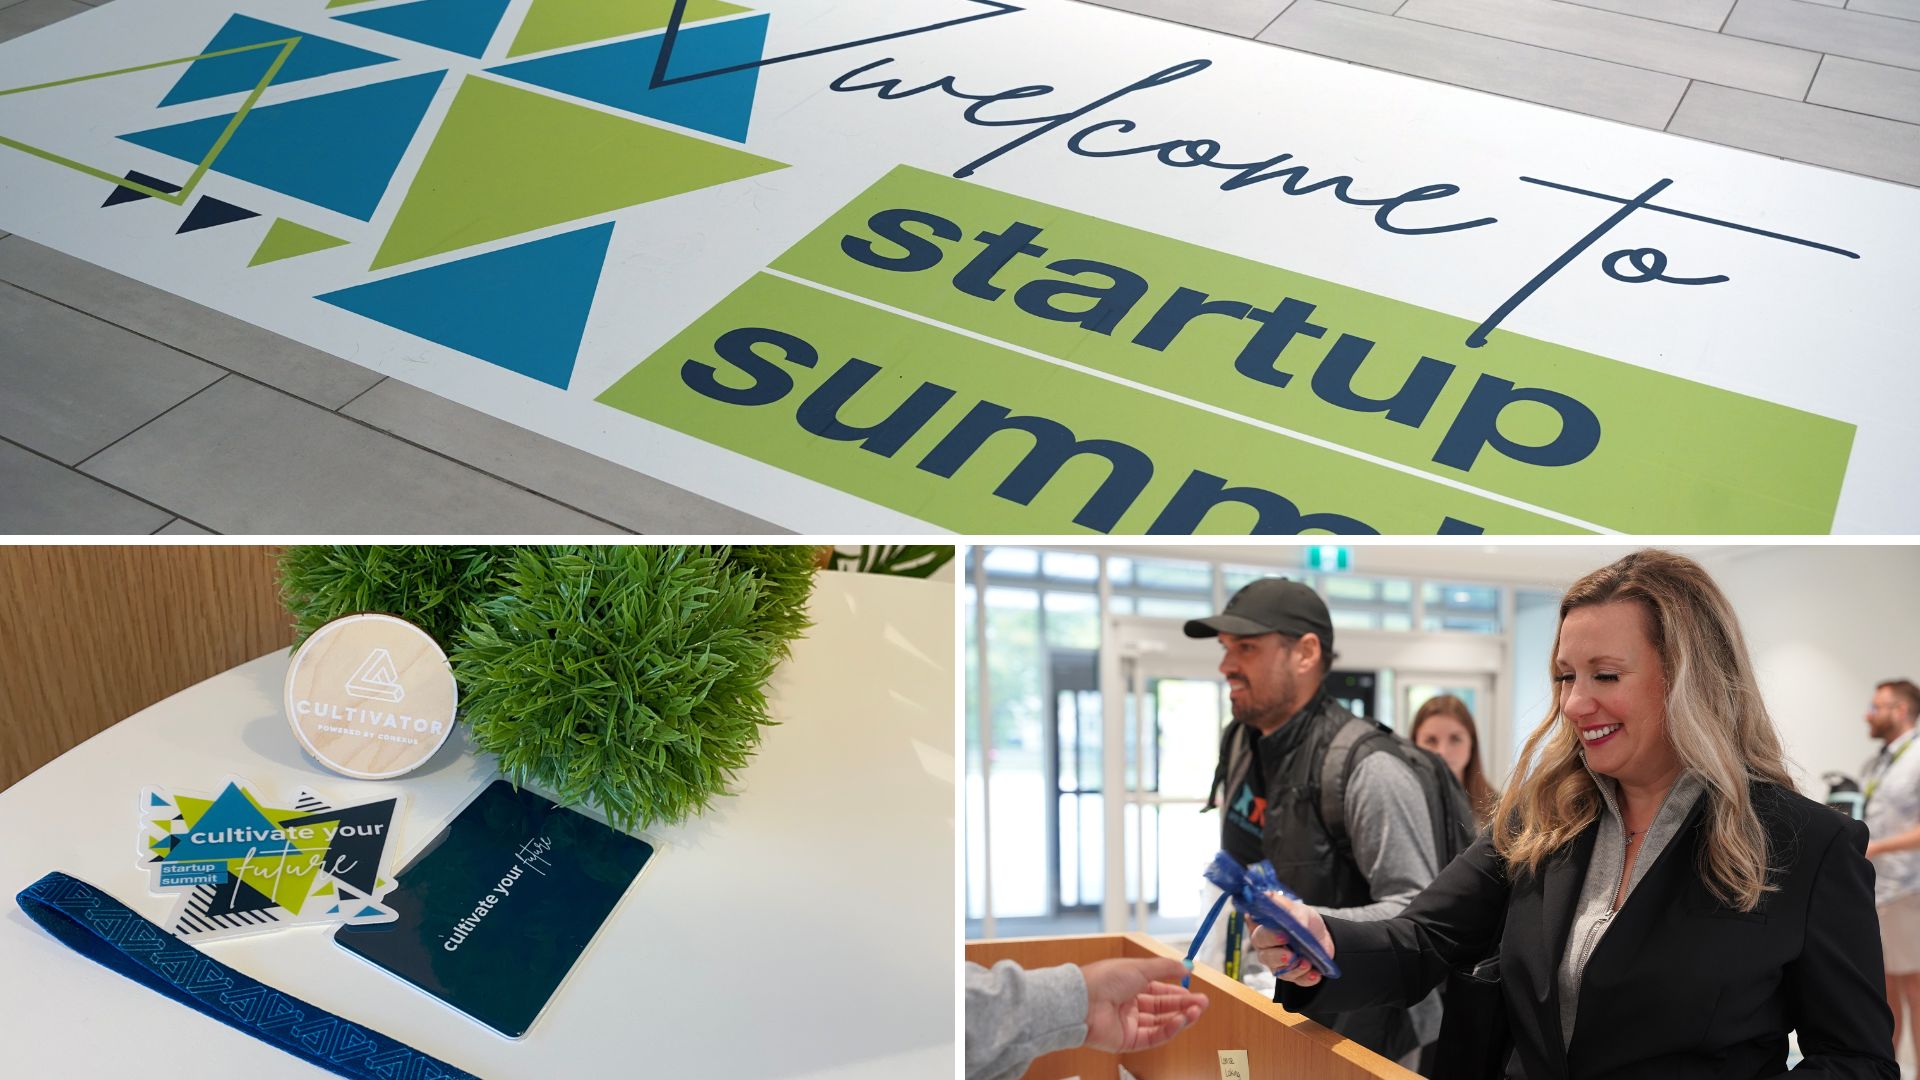 Collage of Startup Summit floor sticker, welcome desk, and experience package